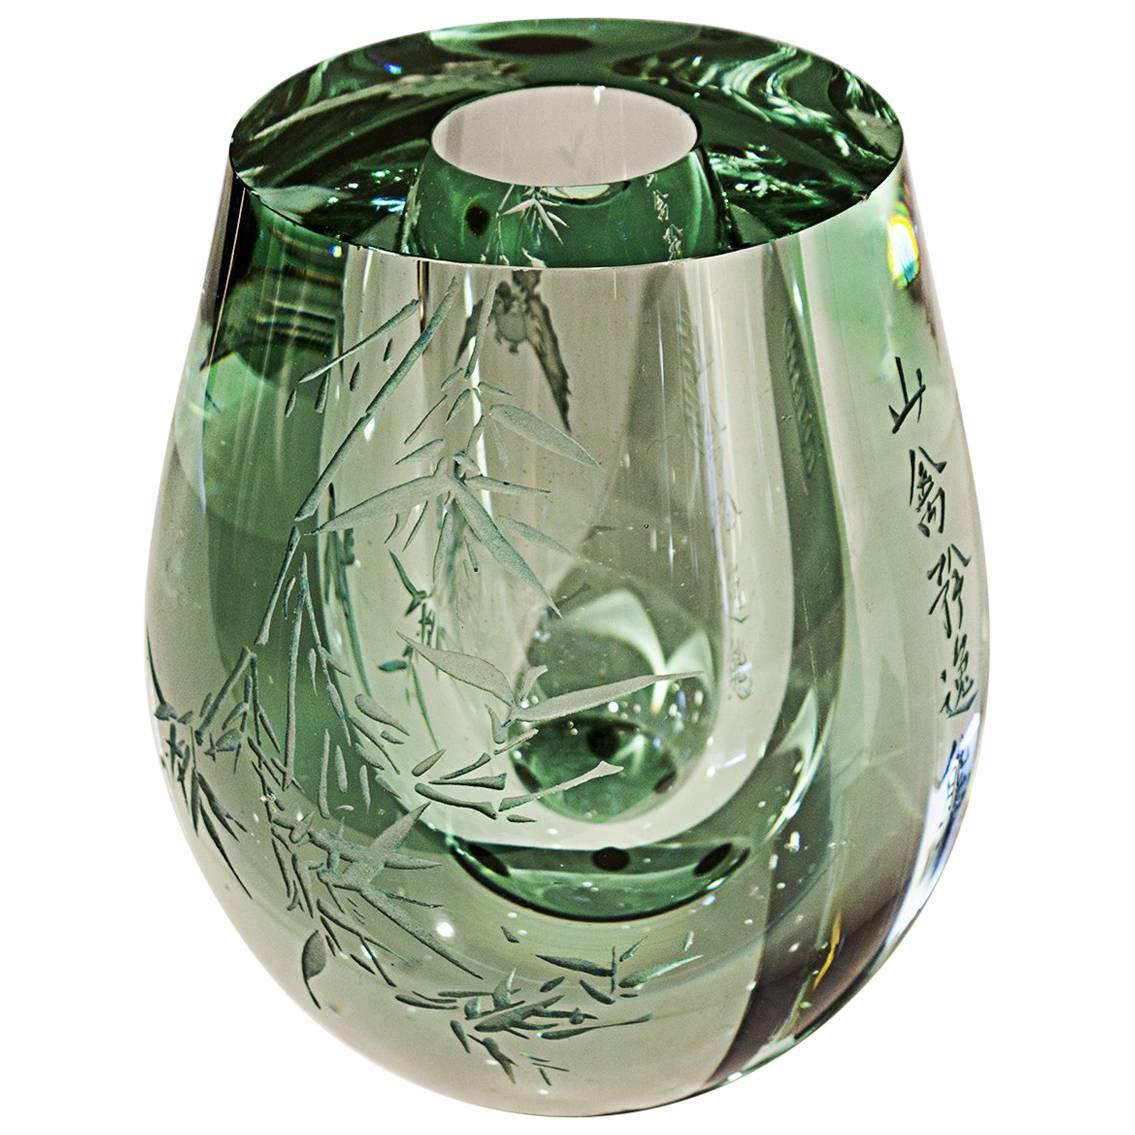 Exquisite Chinese Etched Art Glass Bud Vase